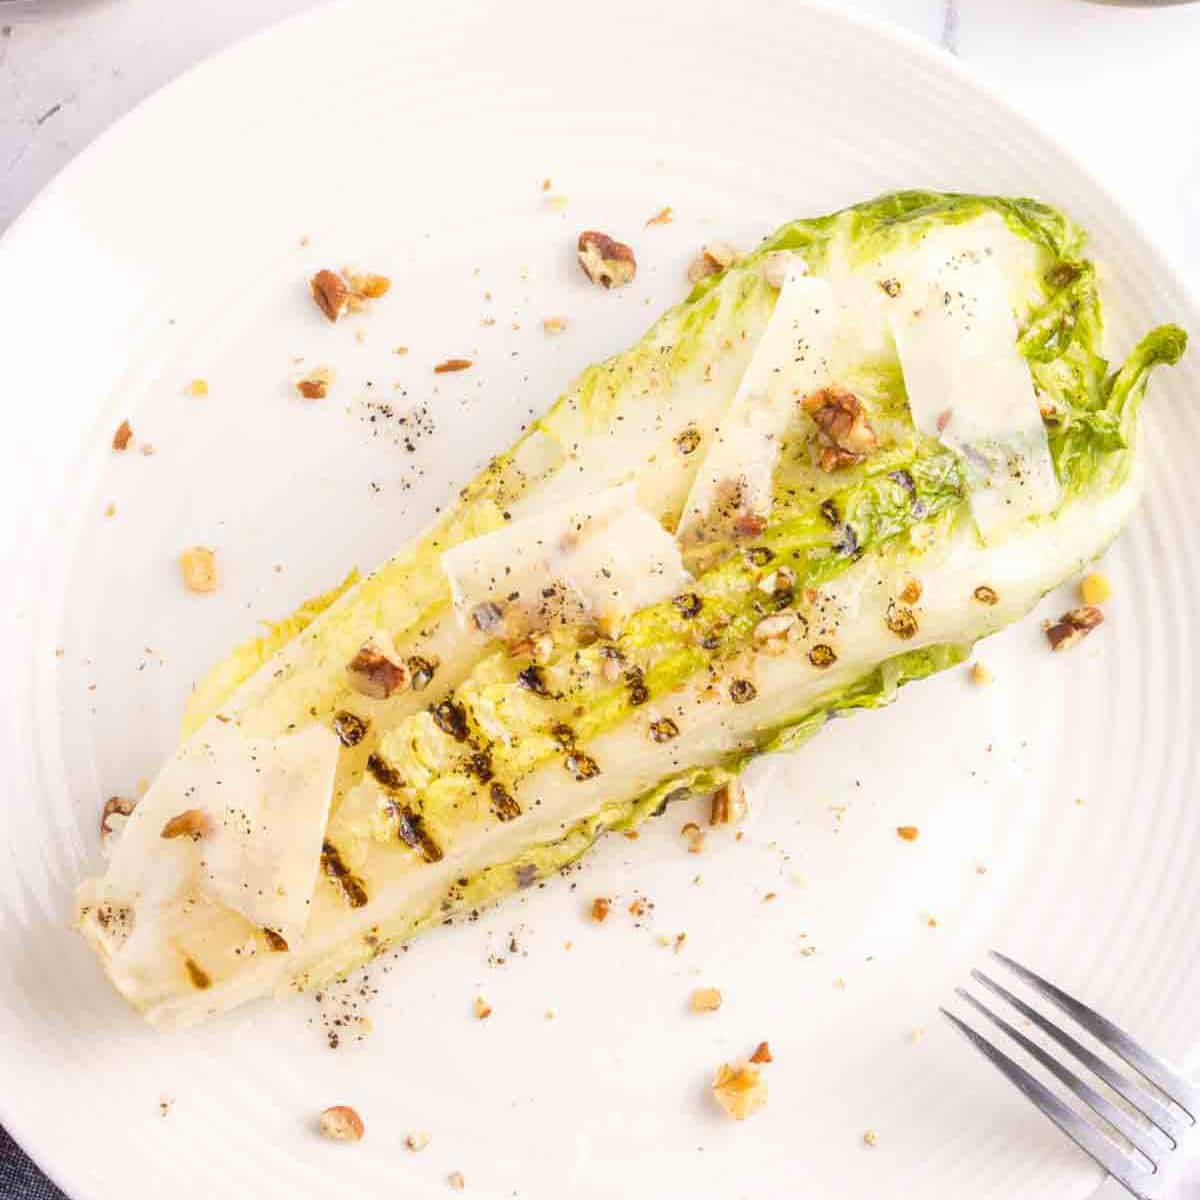 grilled romaine heart with walnuts, shaved Parmesan and vinaigrette